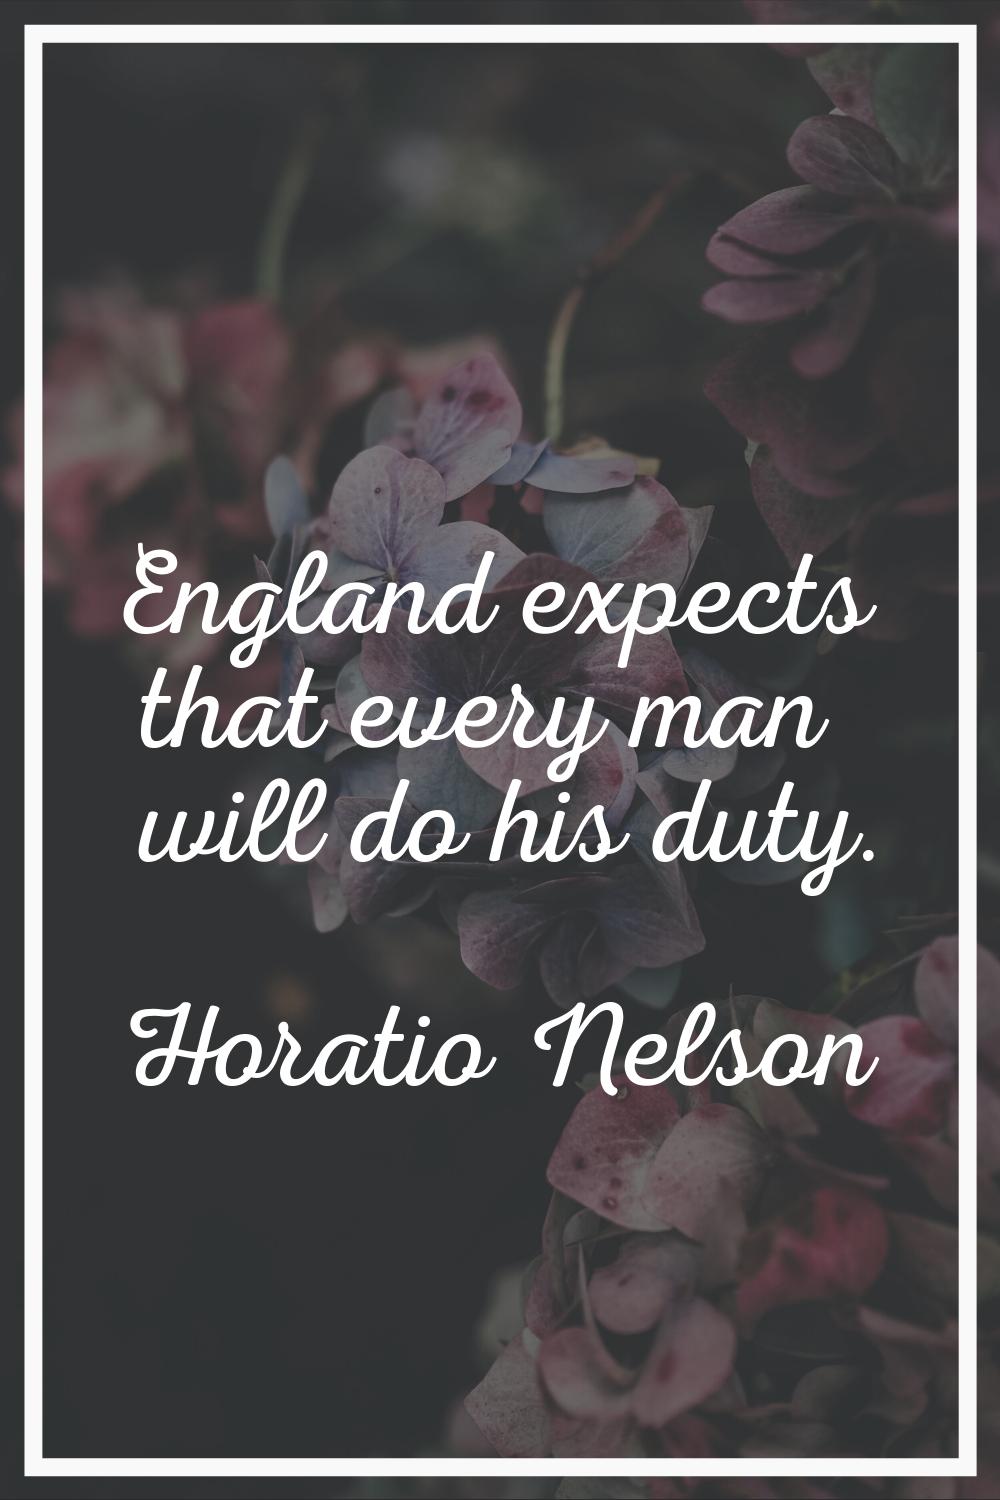 England expects that every man will do his duty.